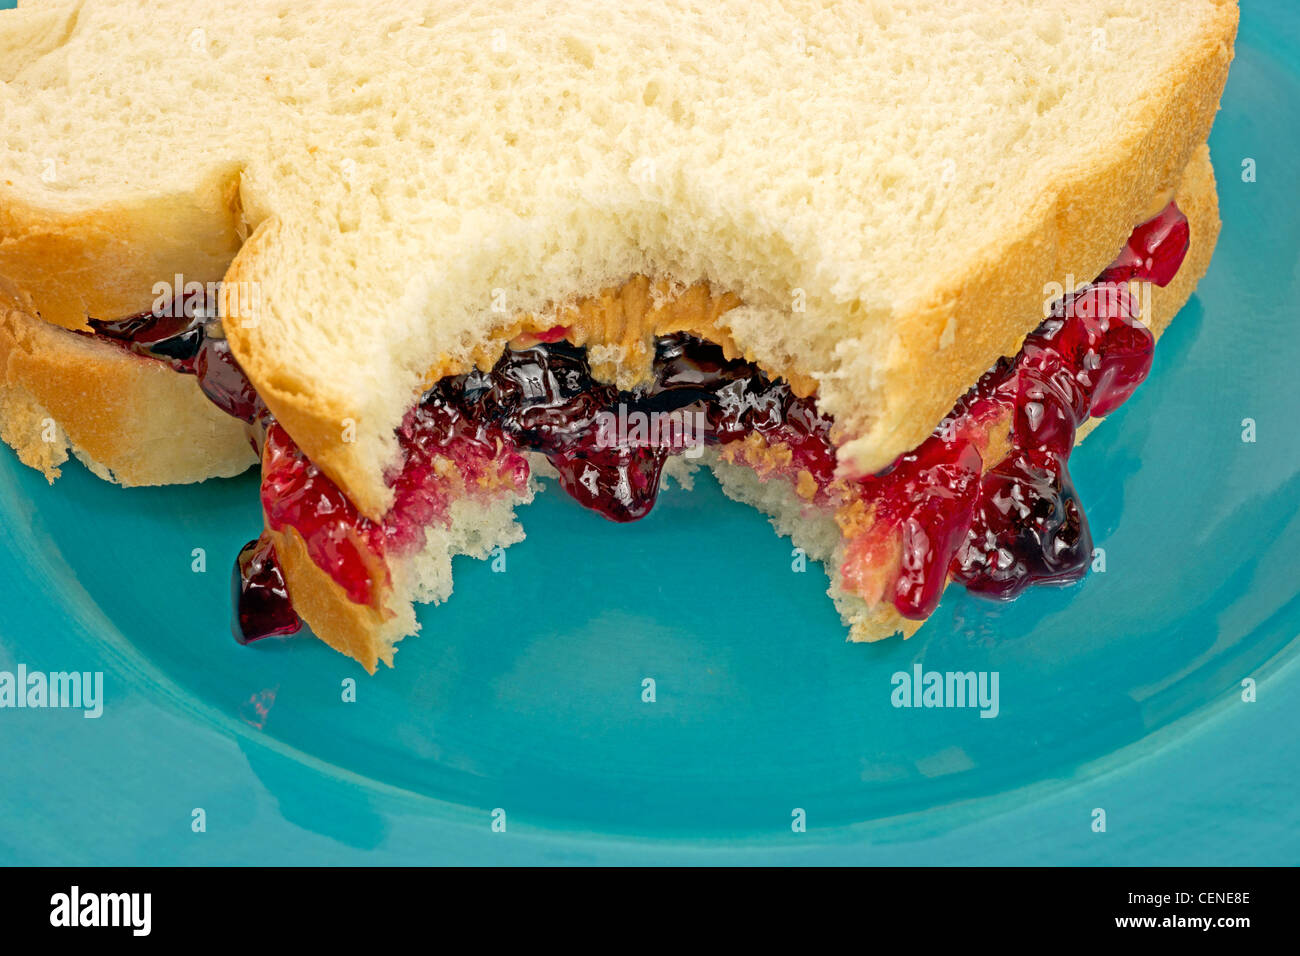 Close View Peanut Butter And Jelly Sandwich On White Bread Bitten Stock Photo Alamy